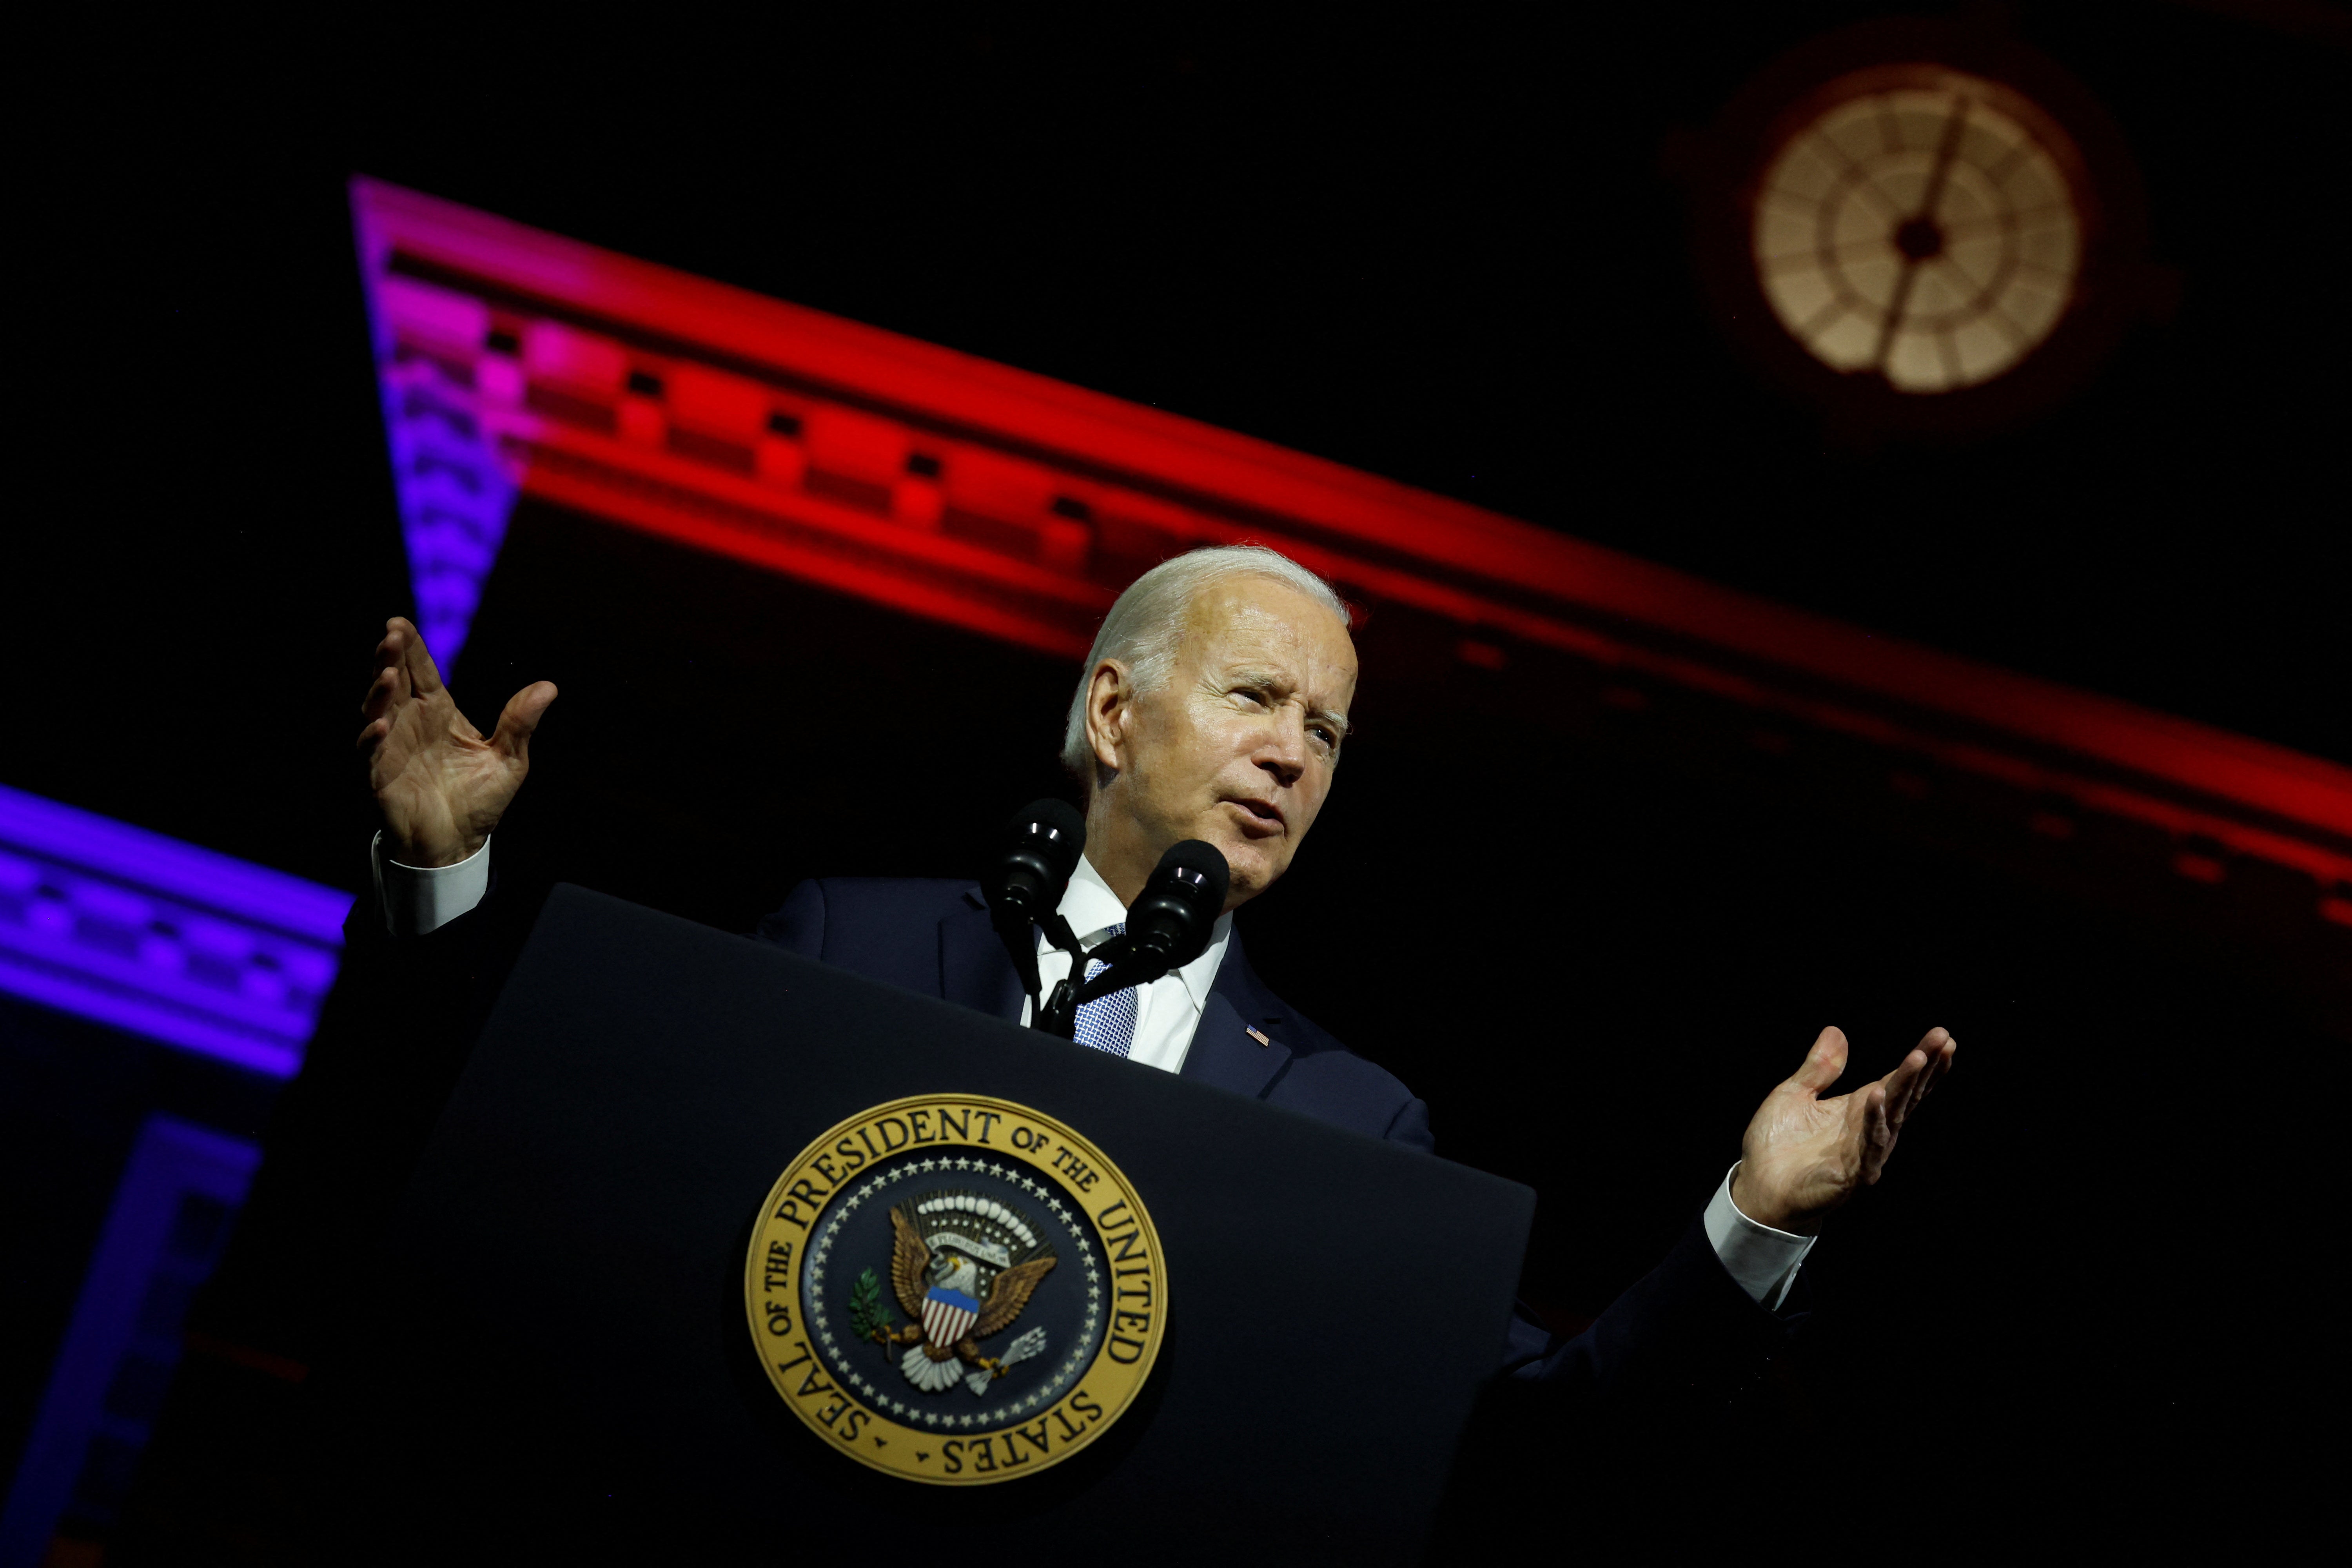 WH fires back at journalists who call Biden speech ‘political,’ uses media’s own reporting against them